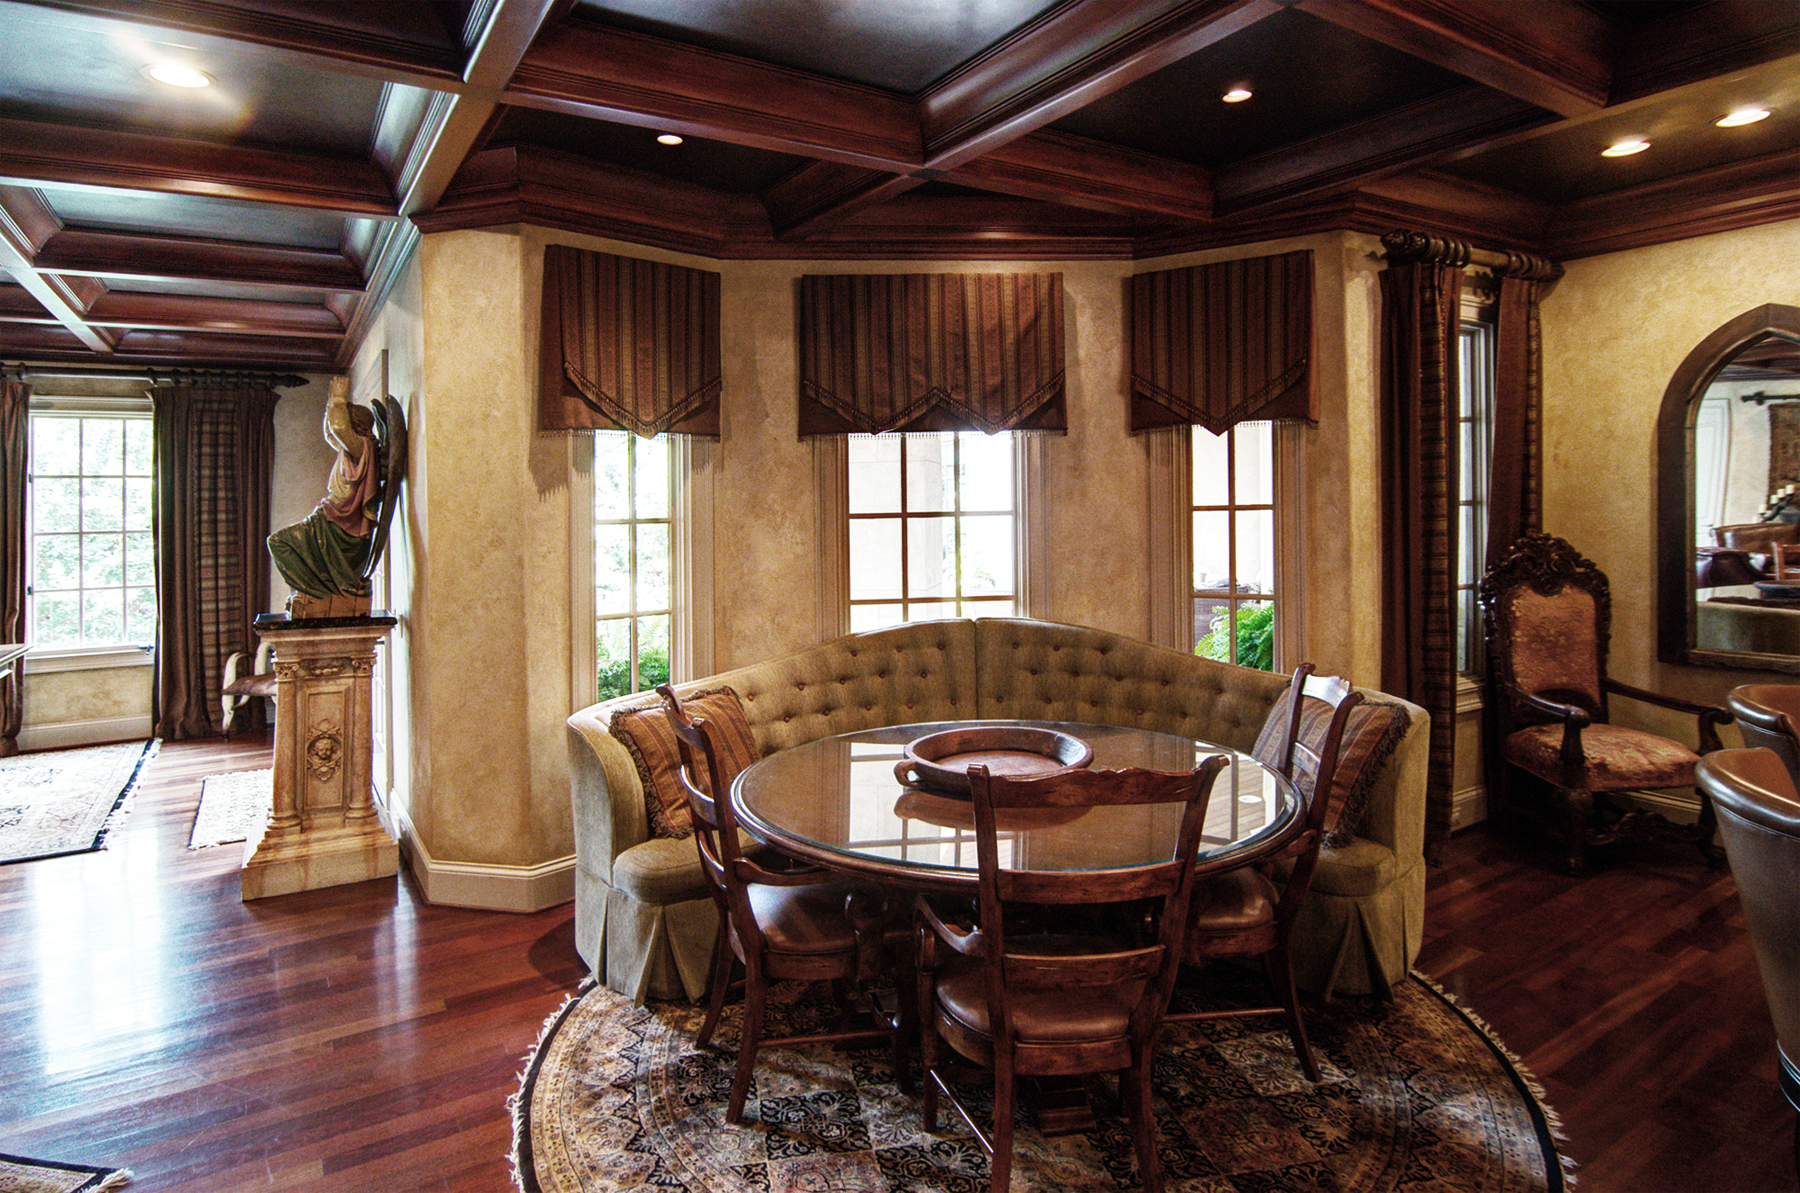 Wood grained coffer ceiling with  faux metal inserts and Tuscan colored plaster walls. Beautiful!